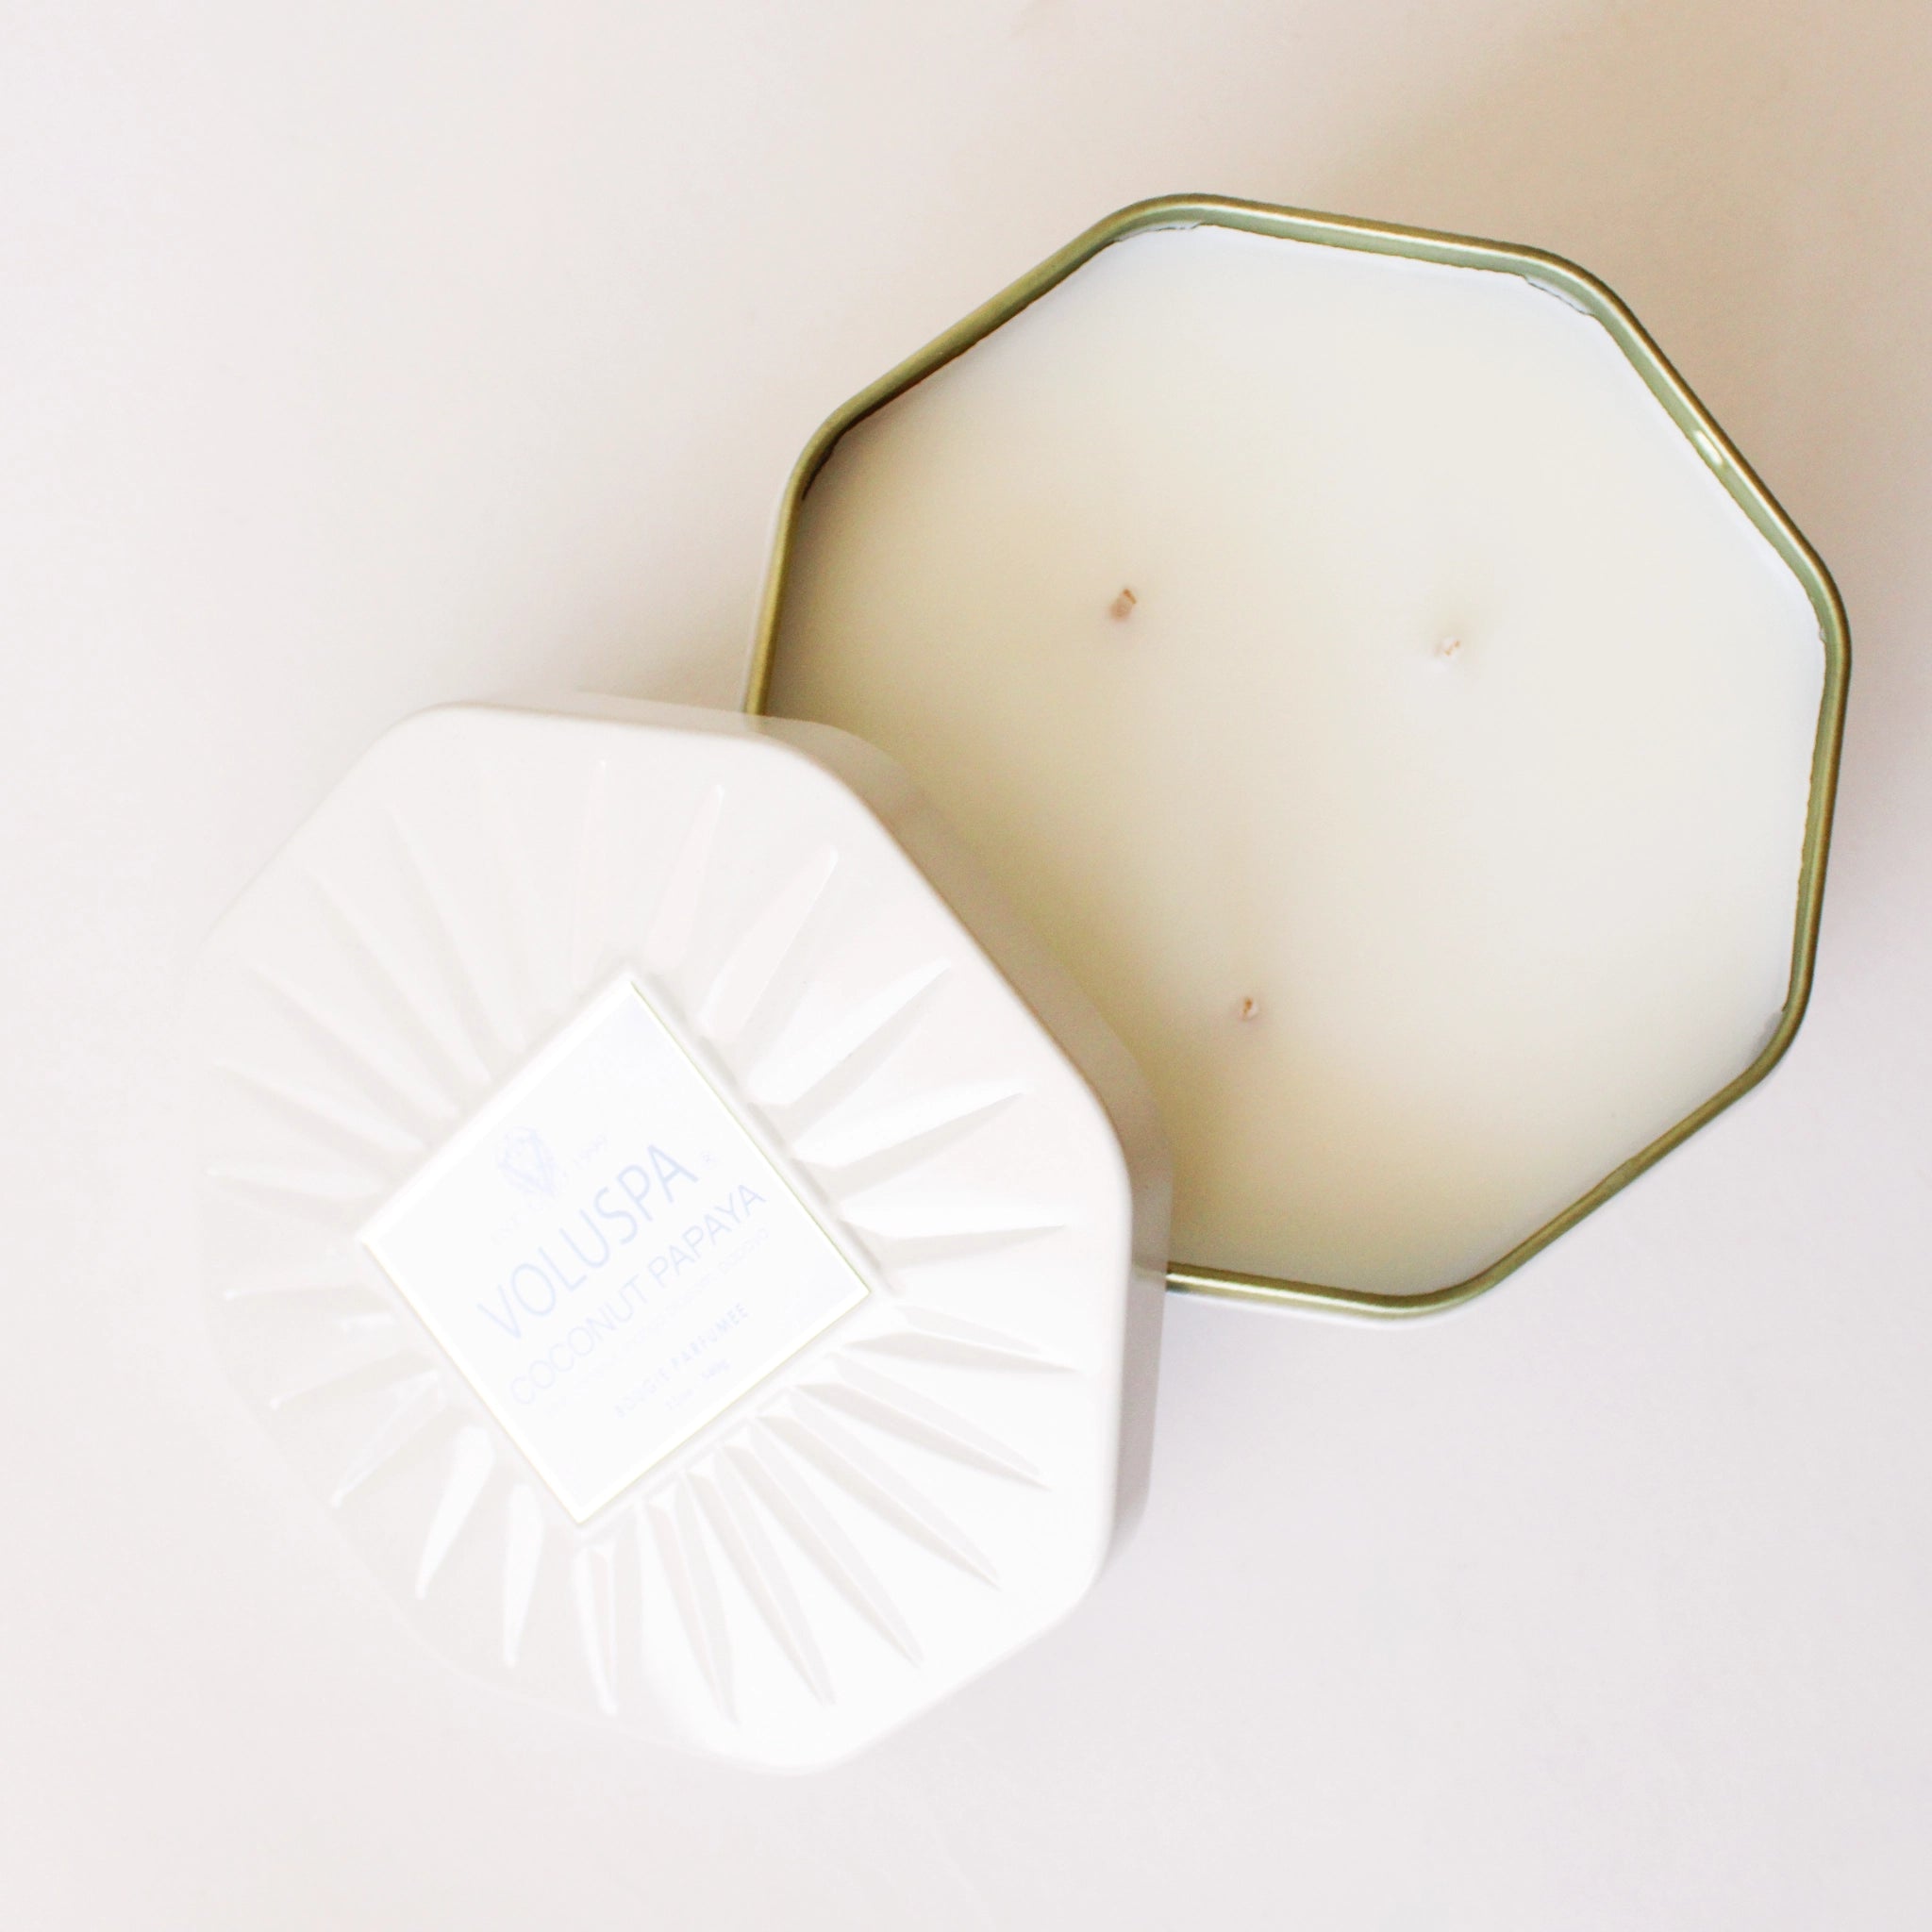 On a white background is an octagon tin in a white shade with a white three wick candle inside along with a label on the lid that reads, "Voluspa Coconut Papaya". 